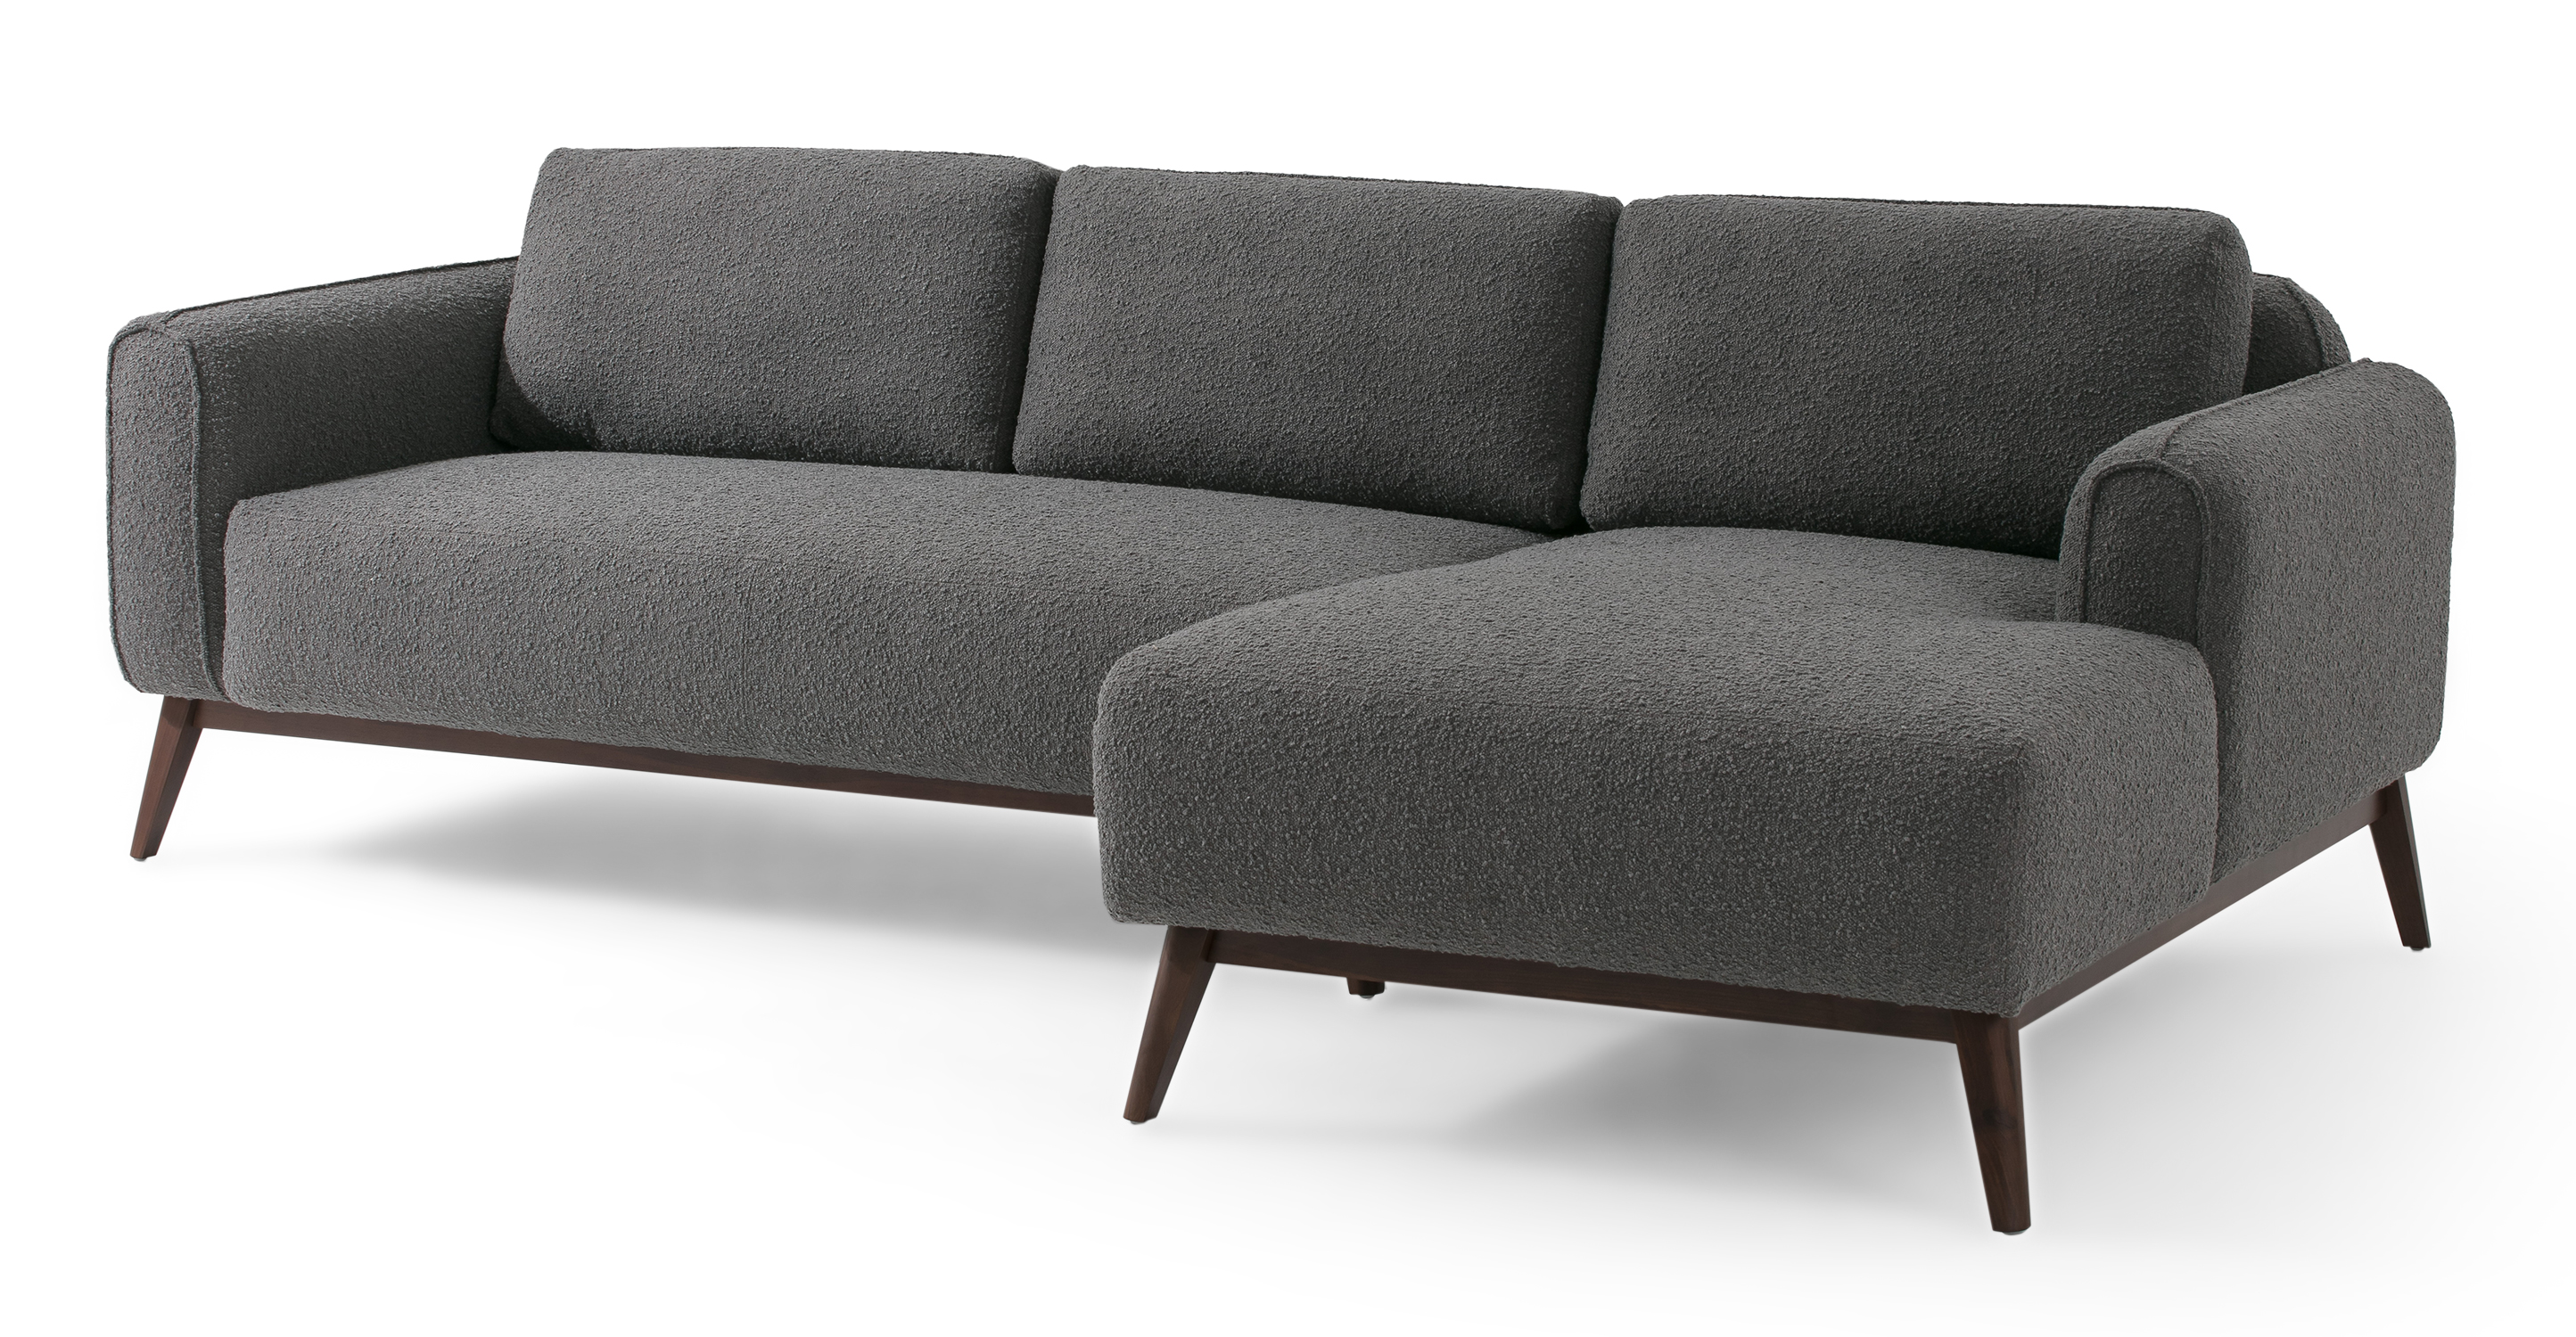 Gris Metro 4 sectional have full stuffed sofa appearance cushion. The arms, back, and seat cushions are affixed and 100% upholstery. Feel is modern and fun. The frame is exposed wood with slanted legs. 